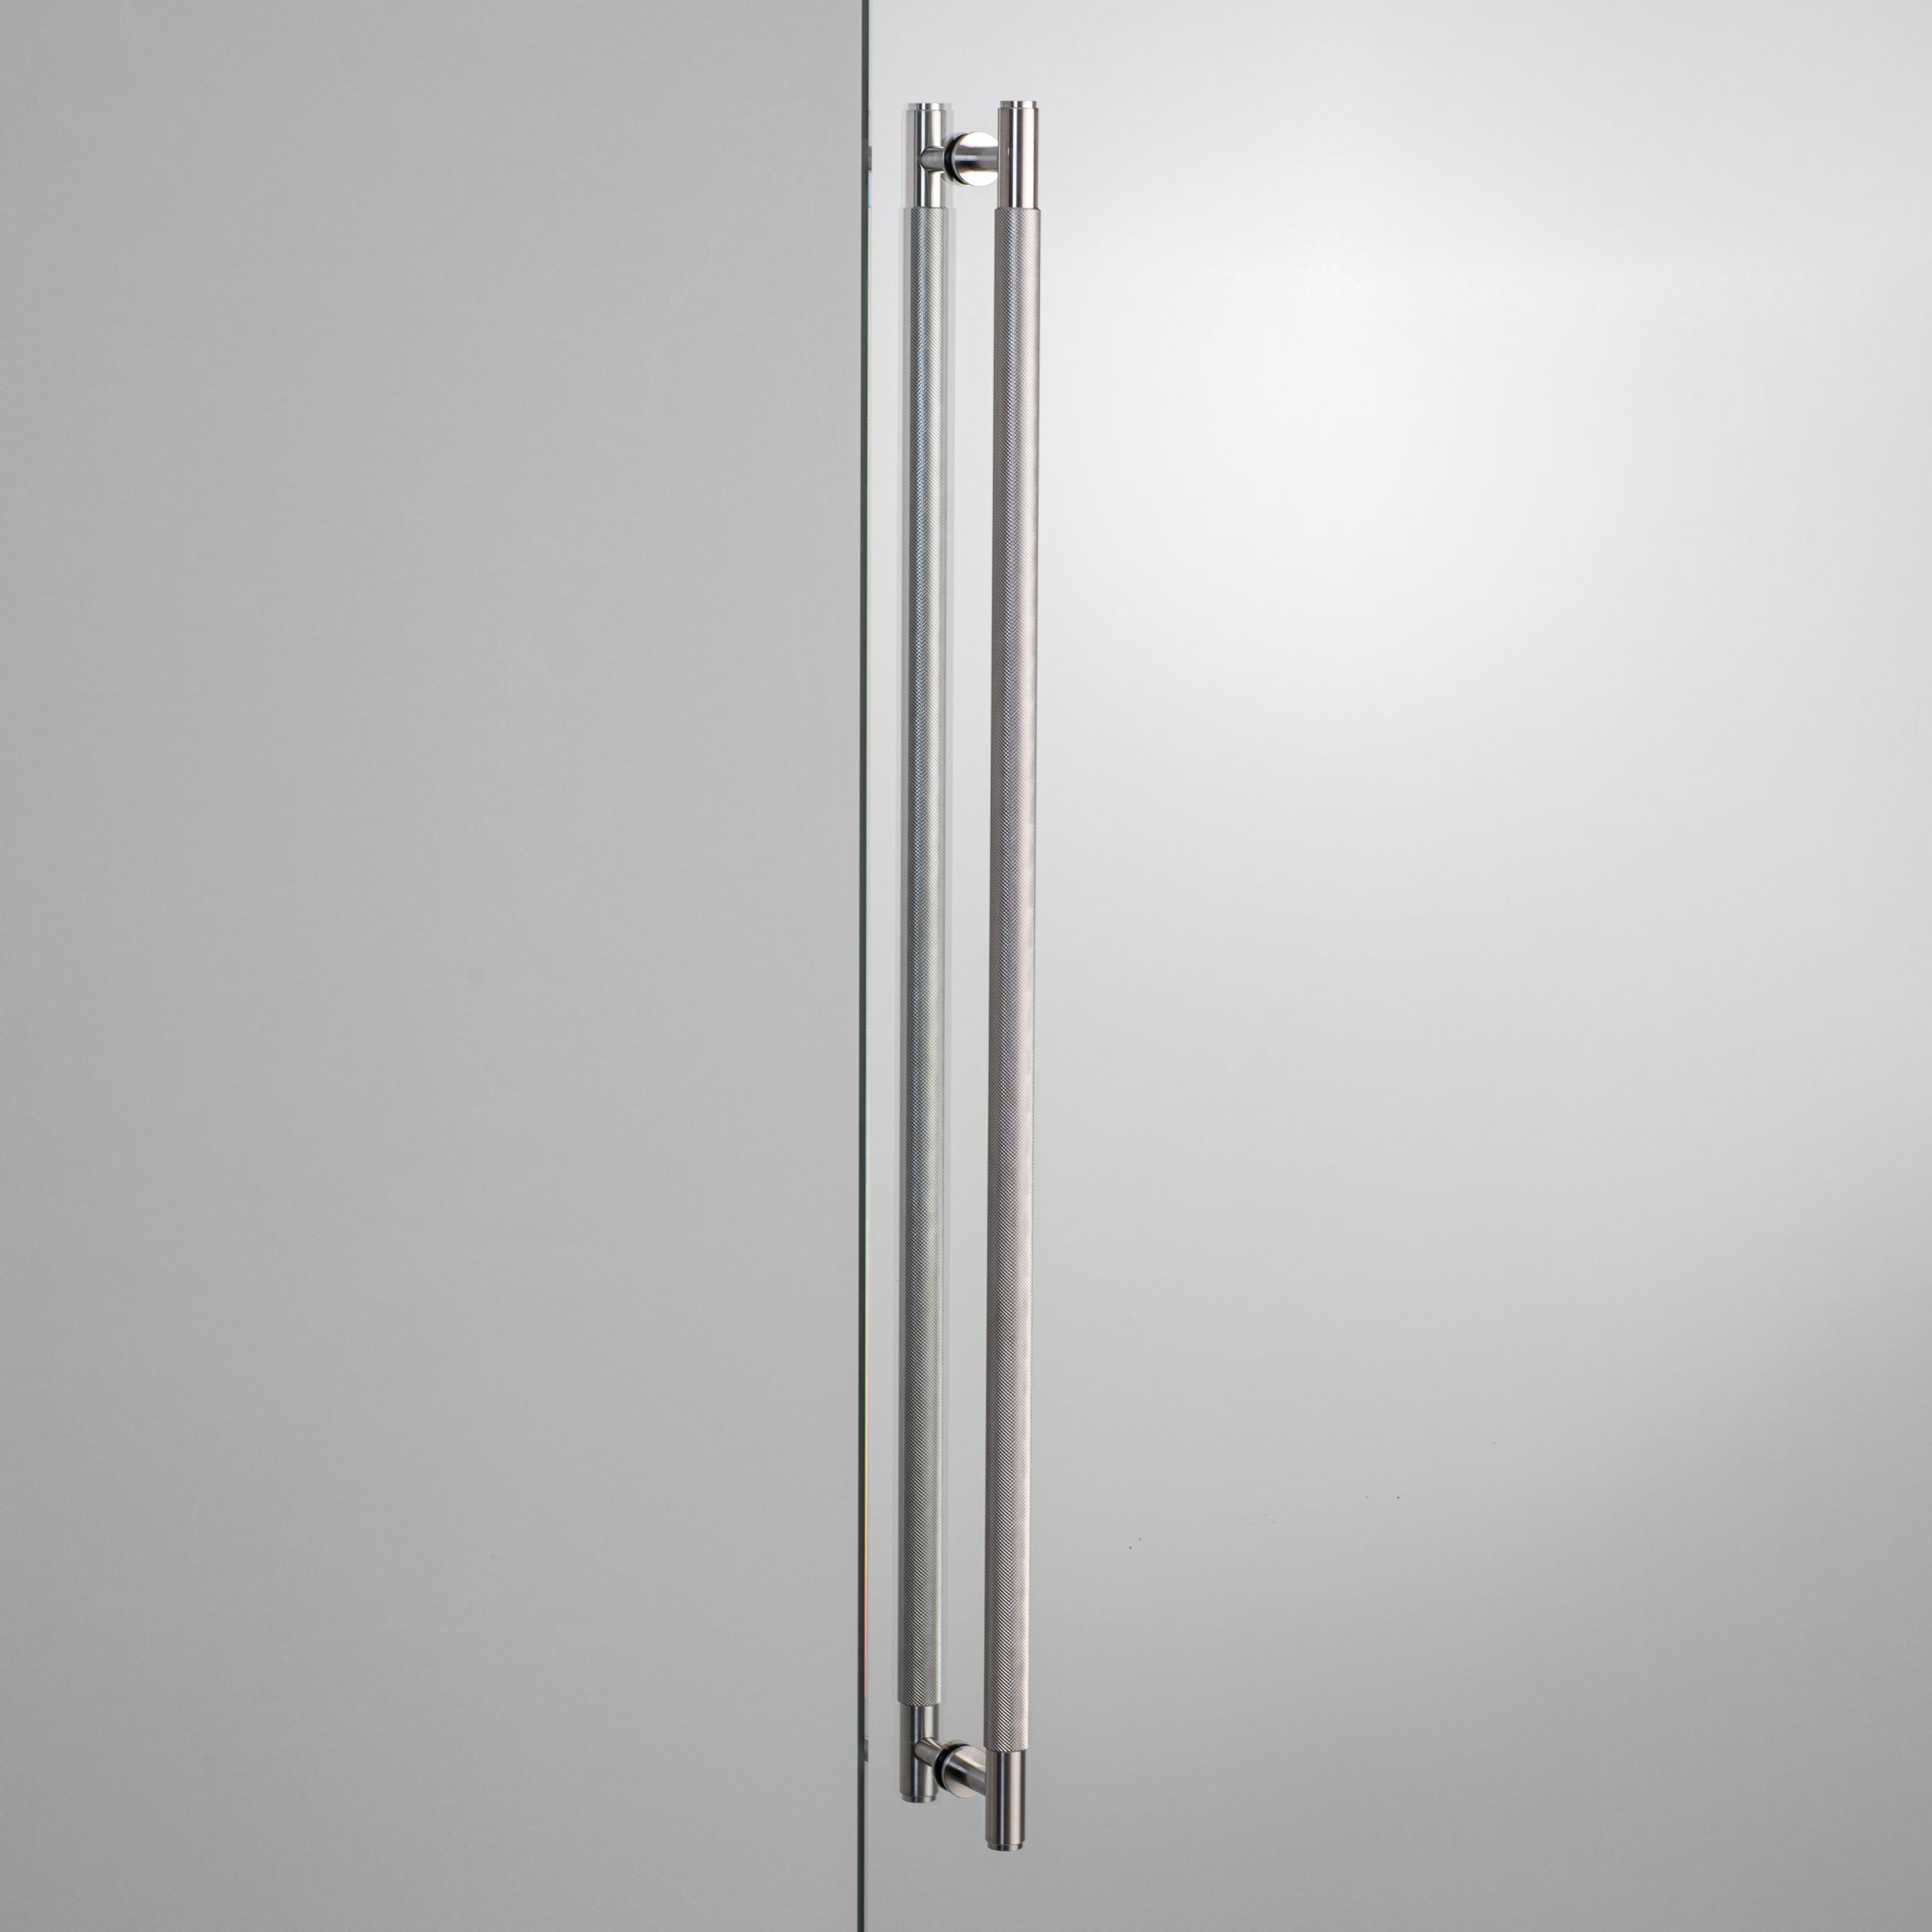 Buster + Punch 30.5 inch Double-sided Cross Knurl Closet Bar Hardware Buster + Punch Steel  